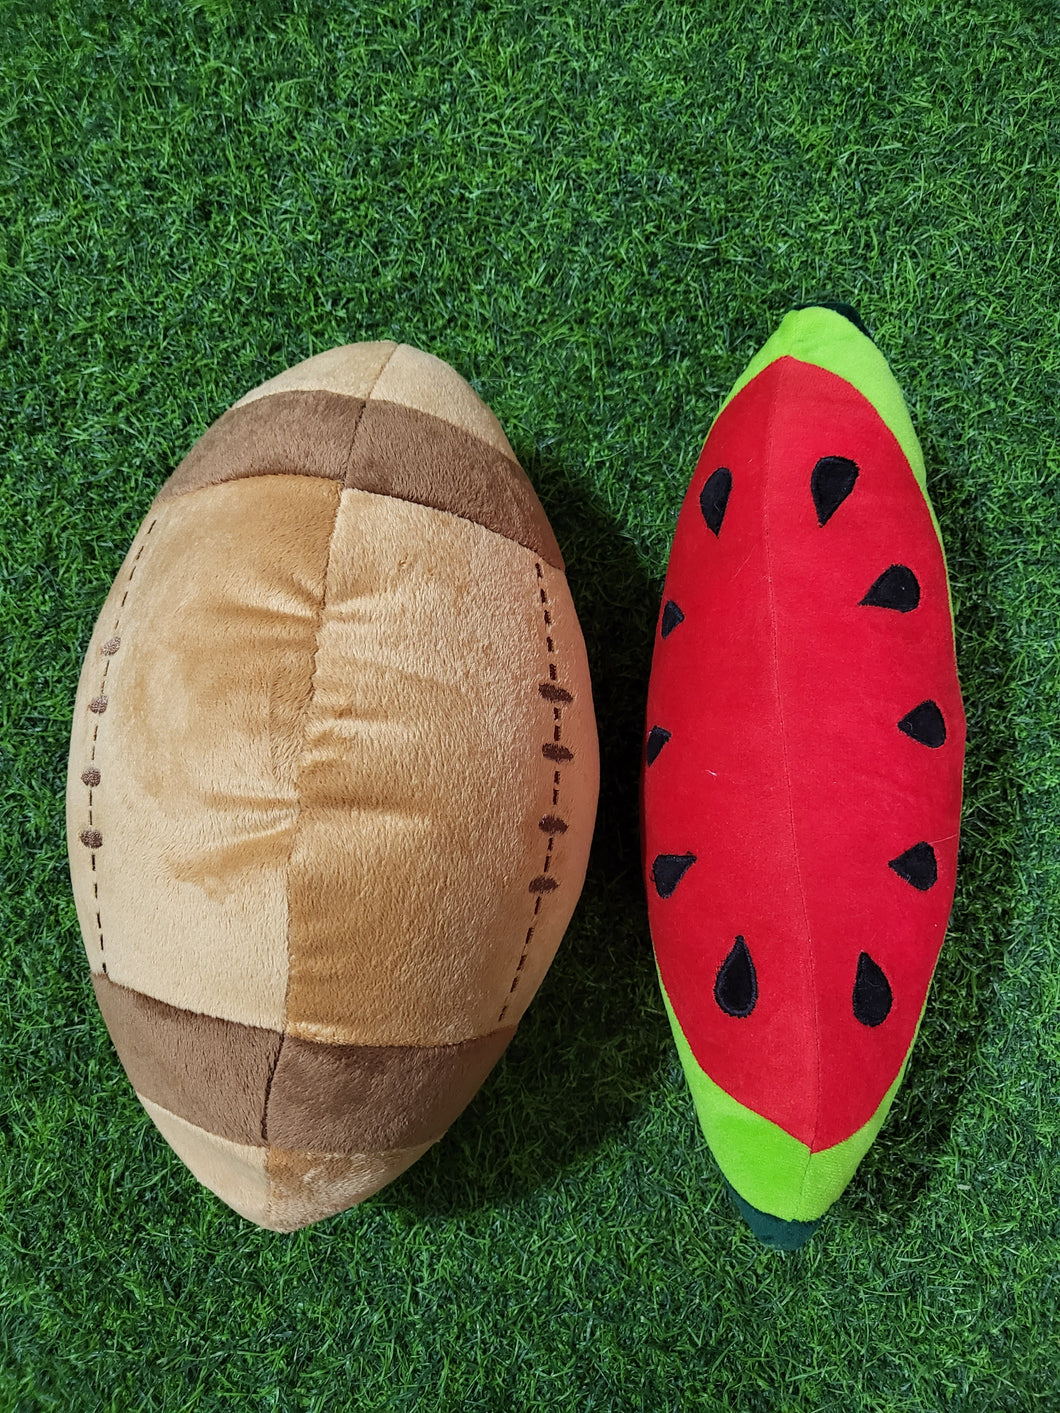 Rugby ball and watermelon slice Combo